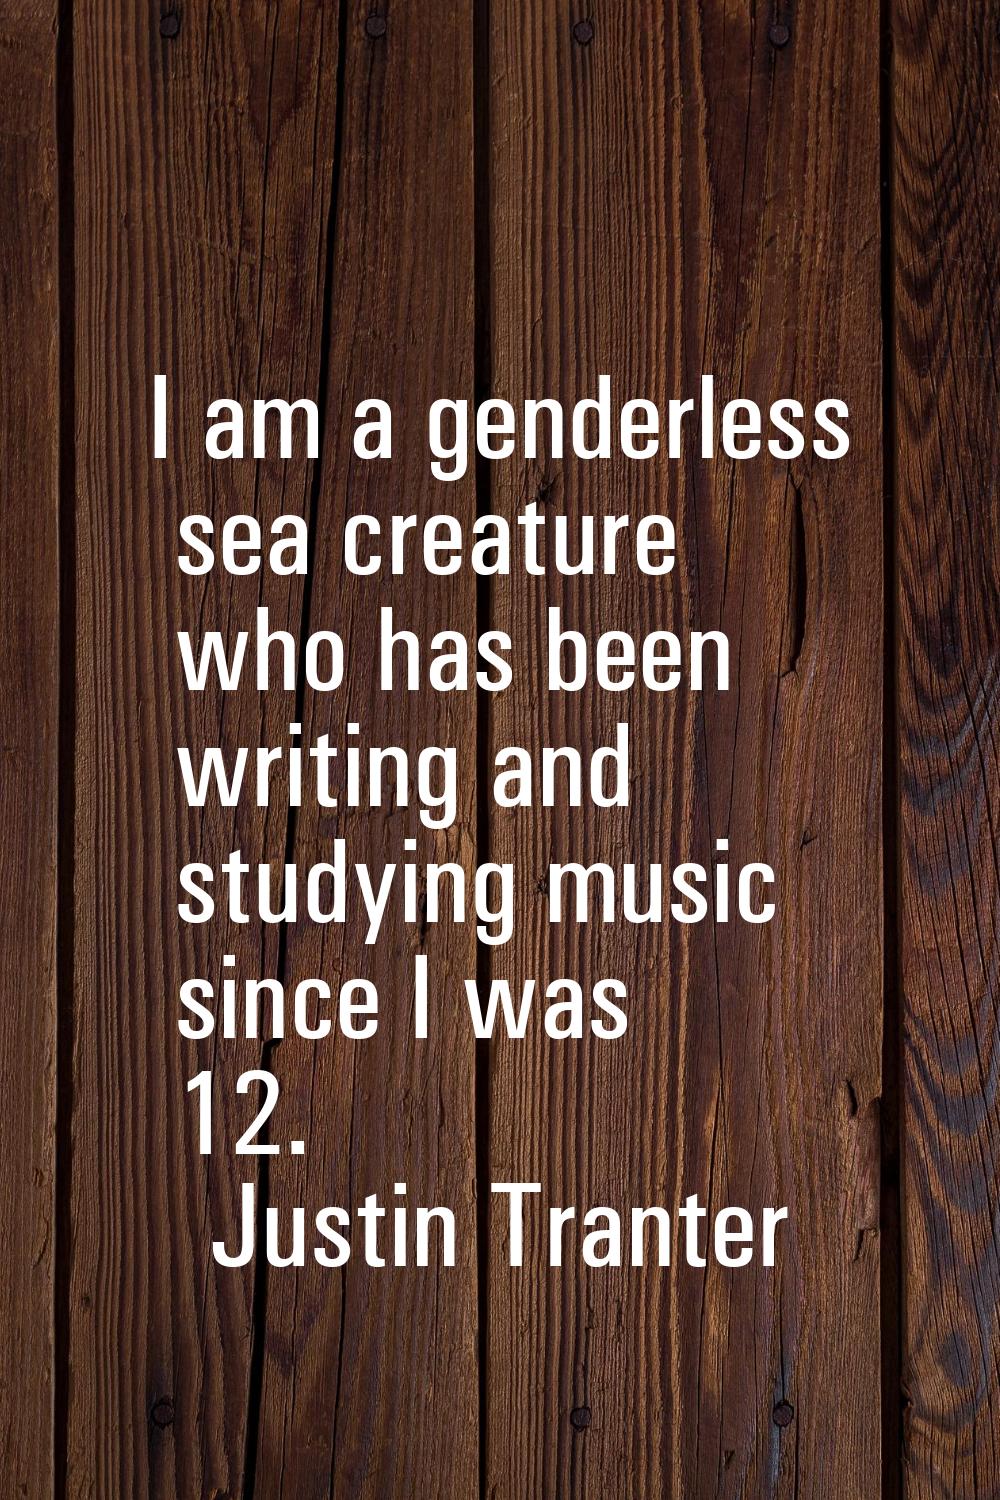 I am a genderless sea creature who has been writing and studying music since I was 12.